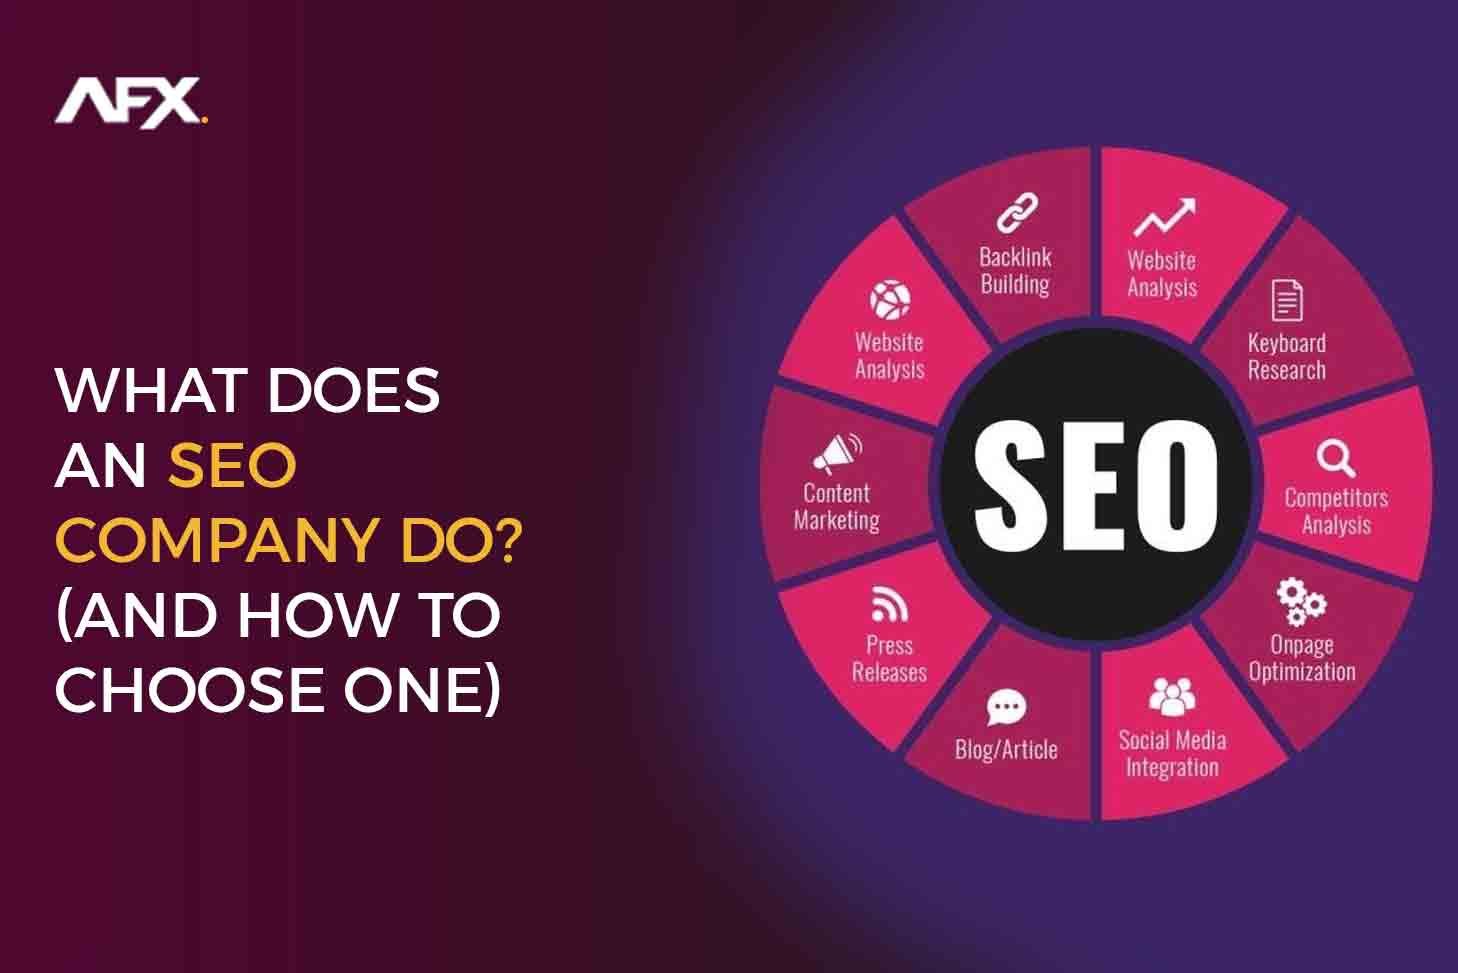 What Does SEO Company Do?